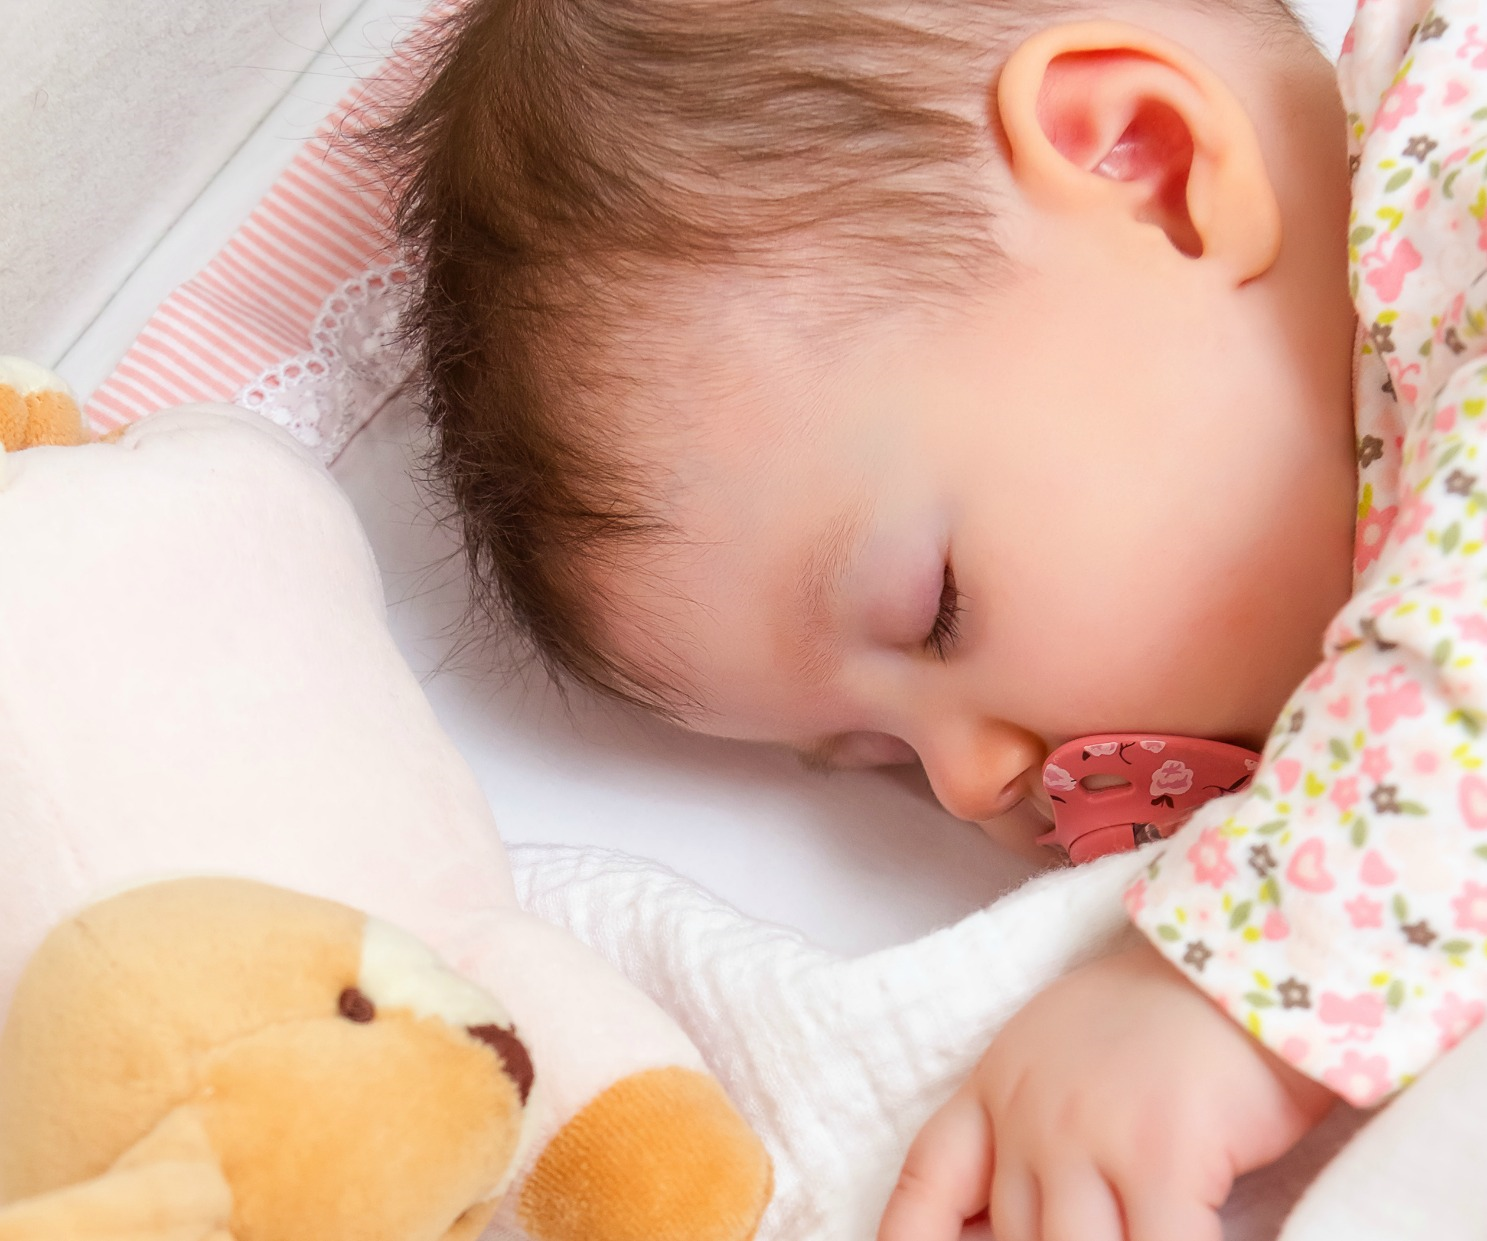 9 useful tips on caring for your congested baby